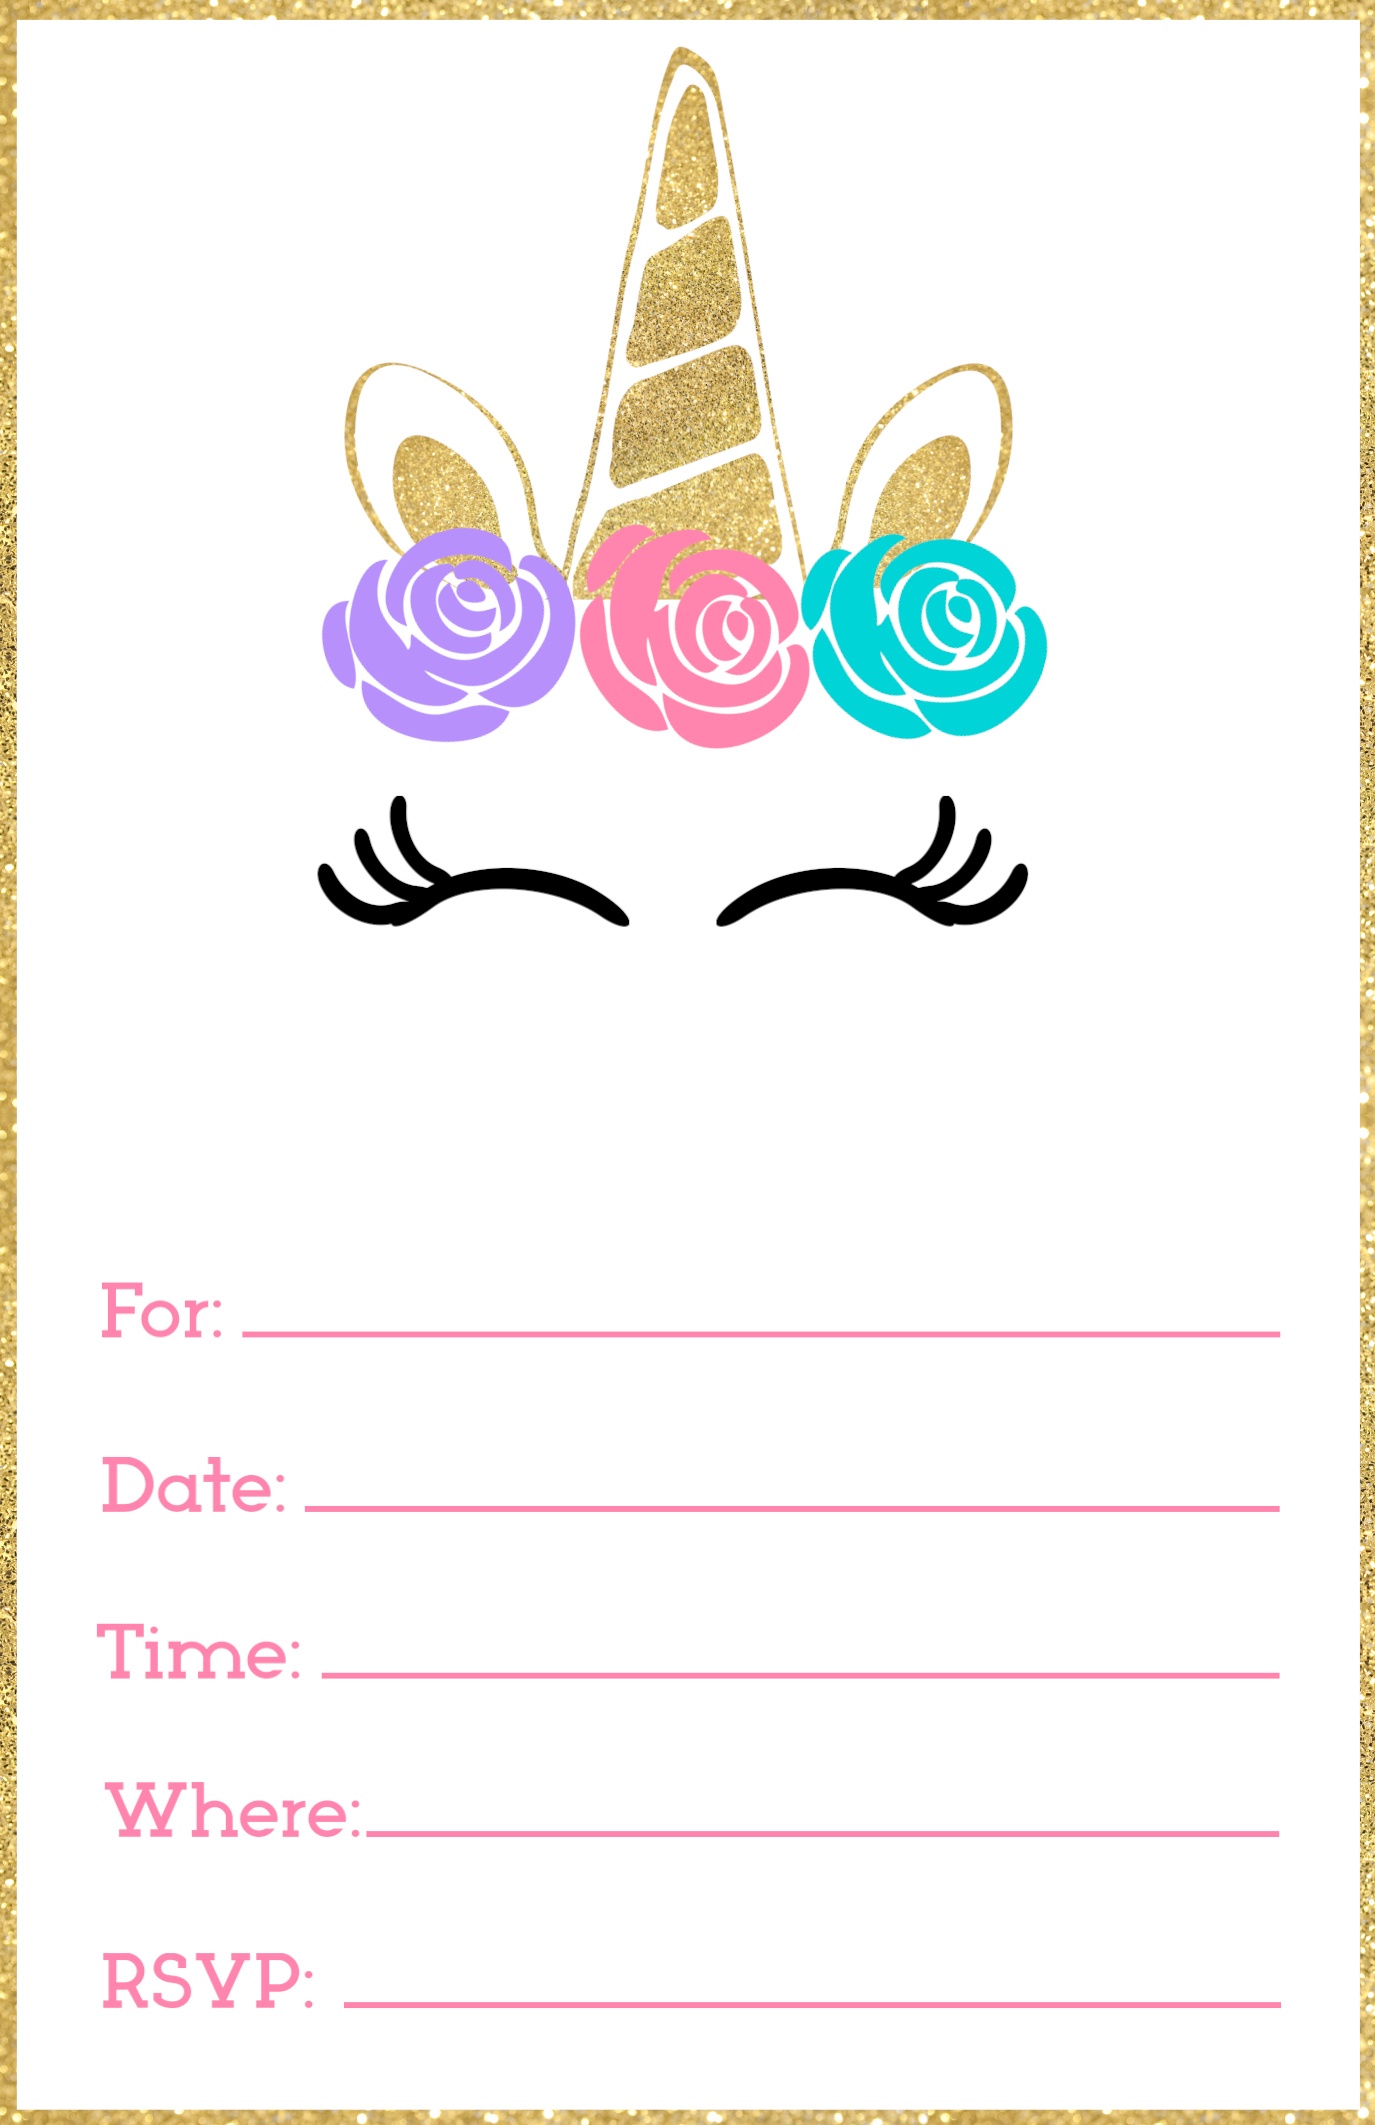 Free Printable Birthday Party Invitations - Granizmondal - Free Printable Birthday Party Invitations With Photo